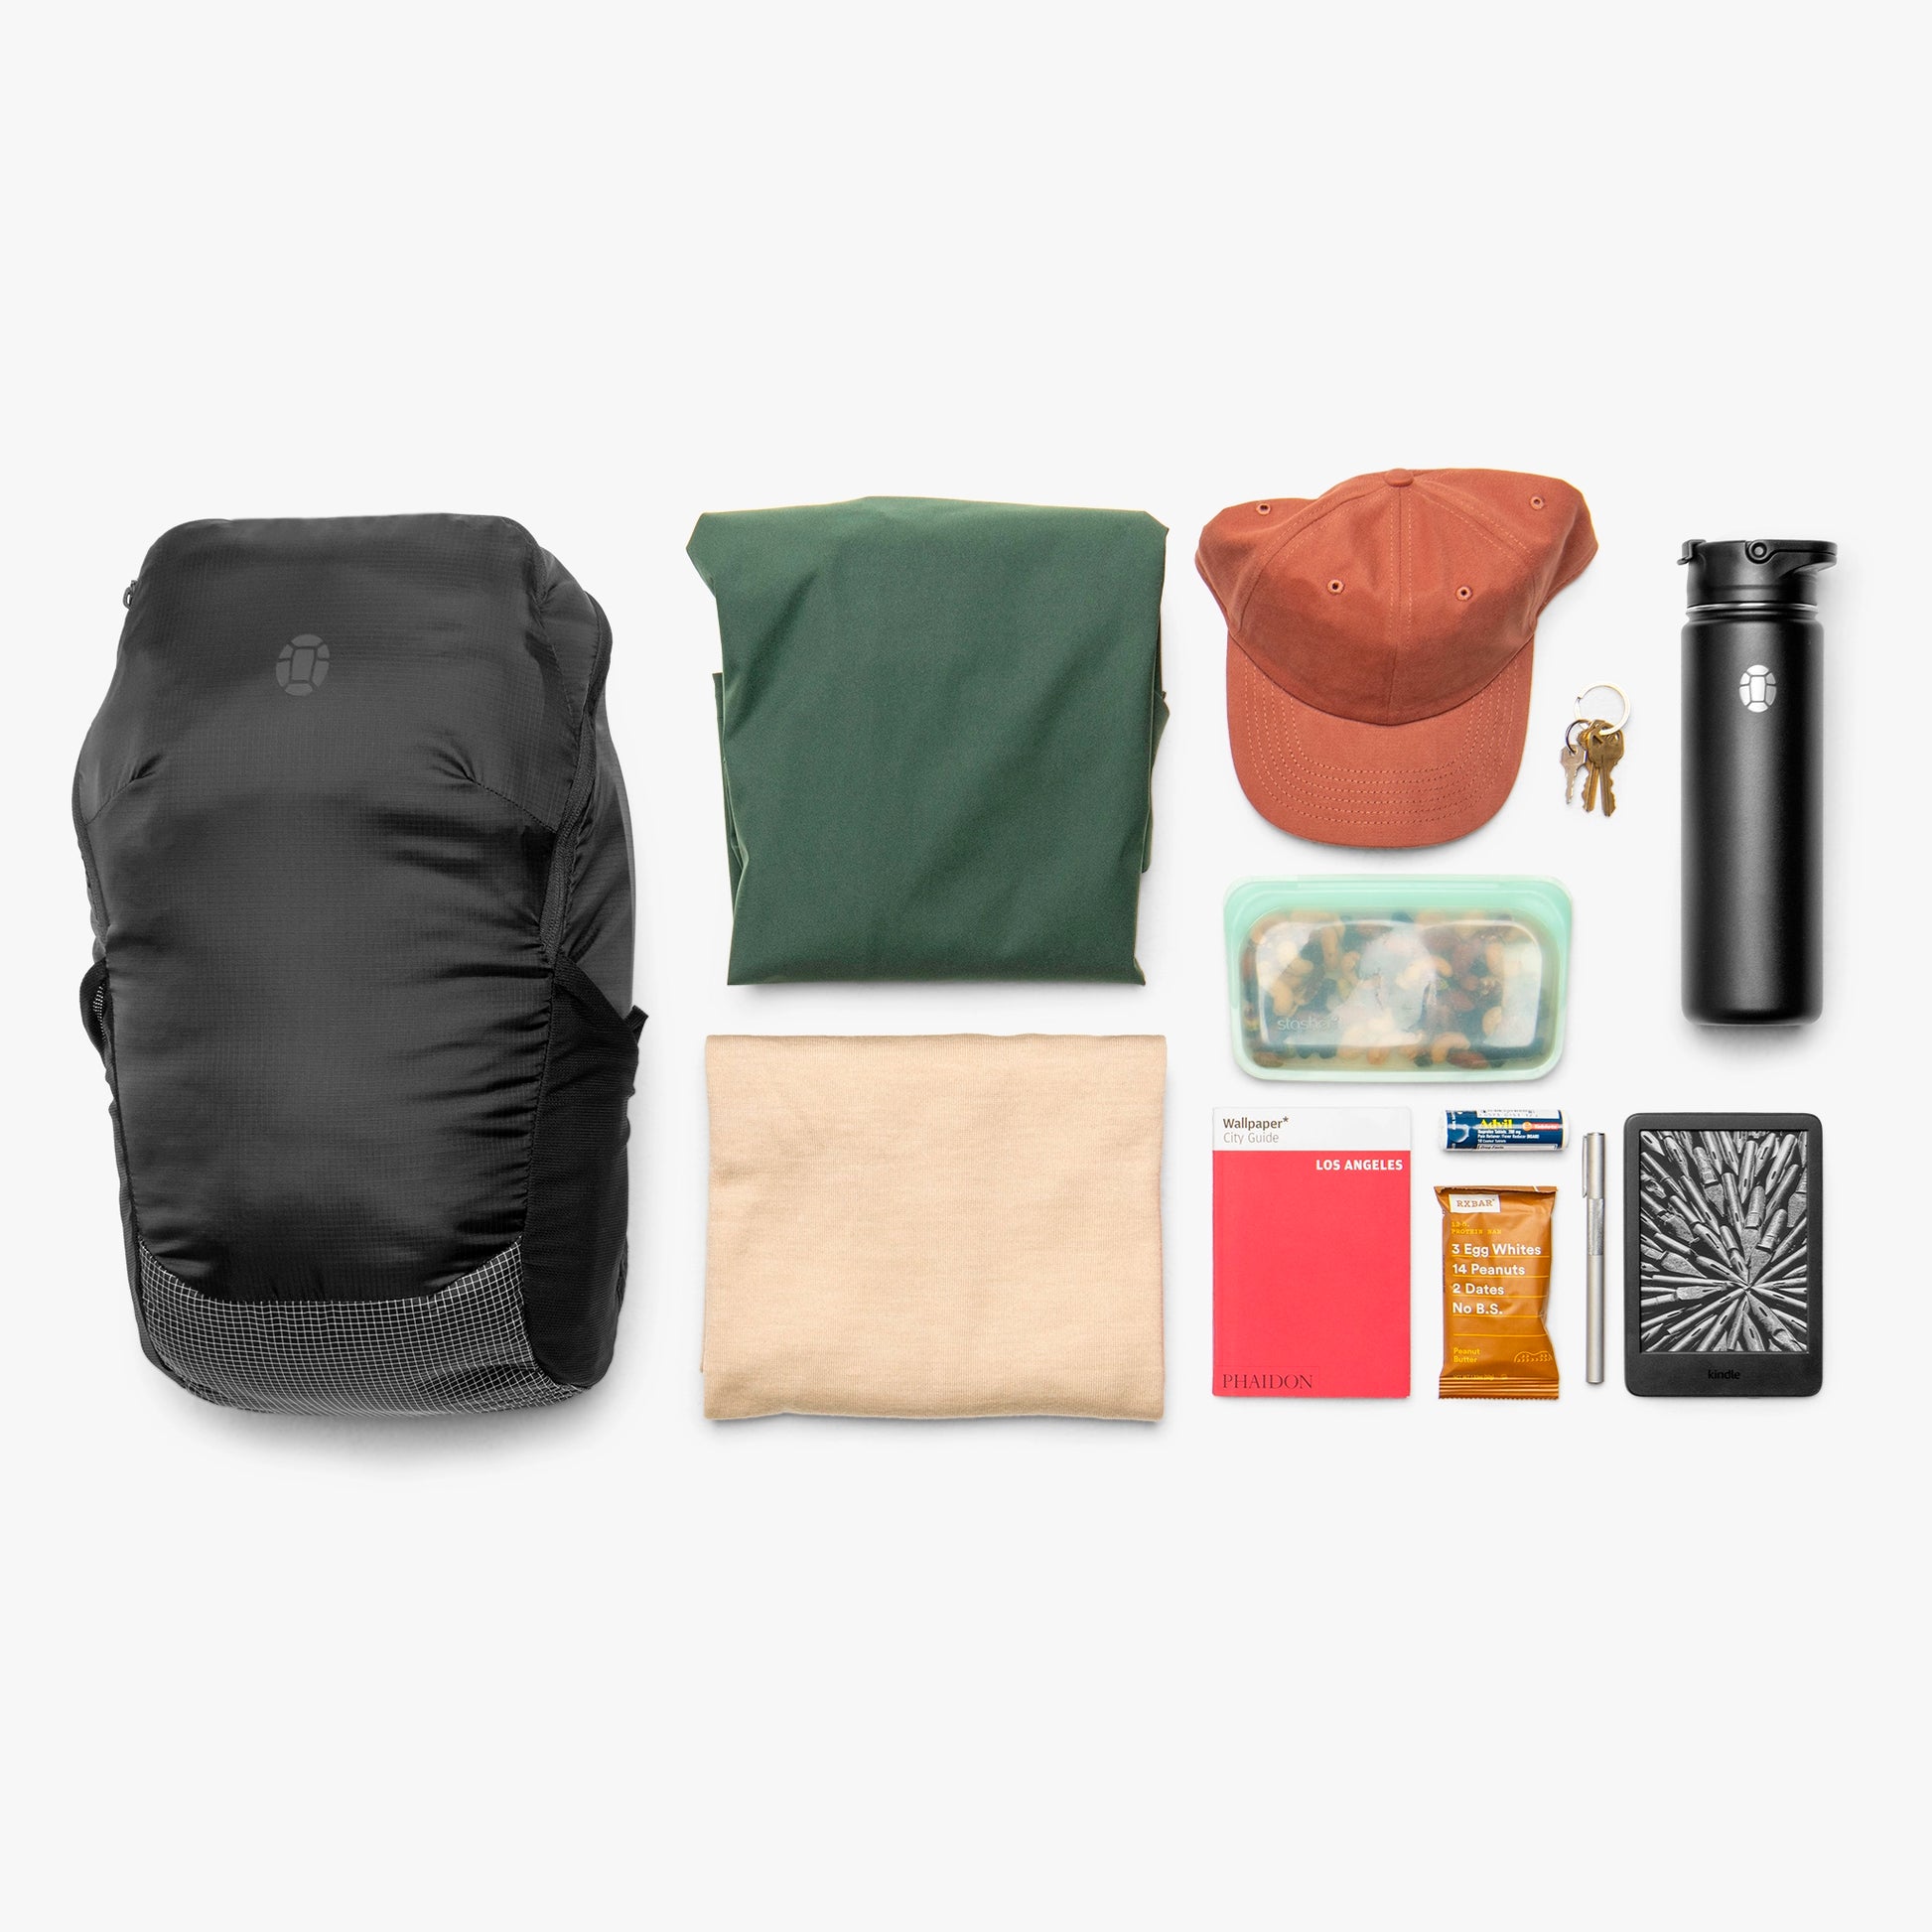 Bring everything you need for a day of sightseeing